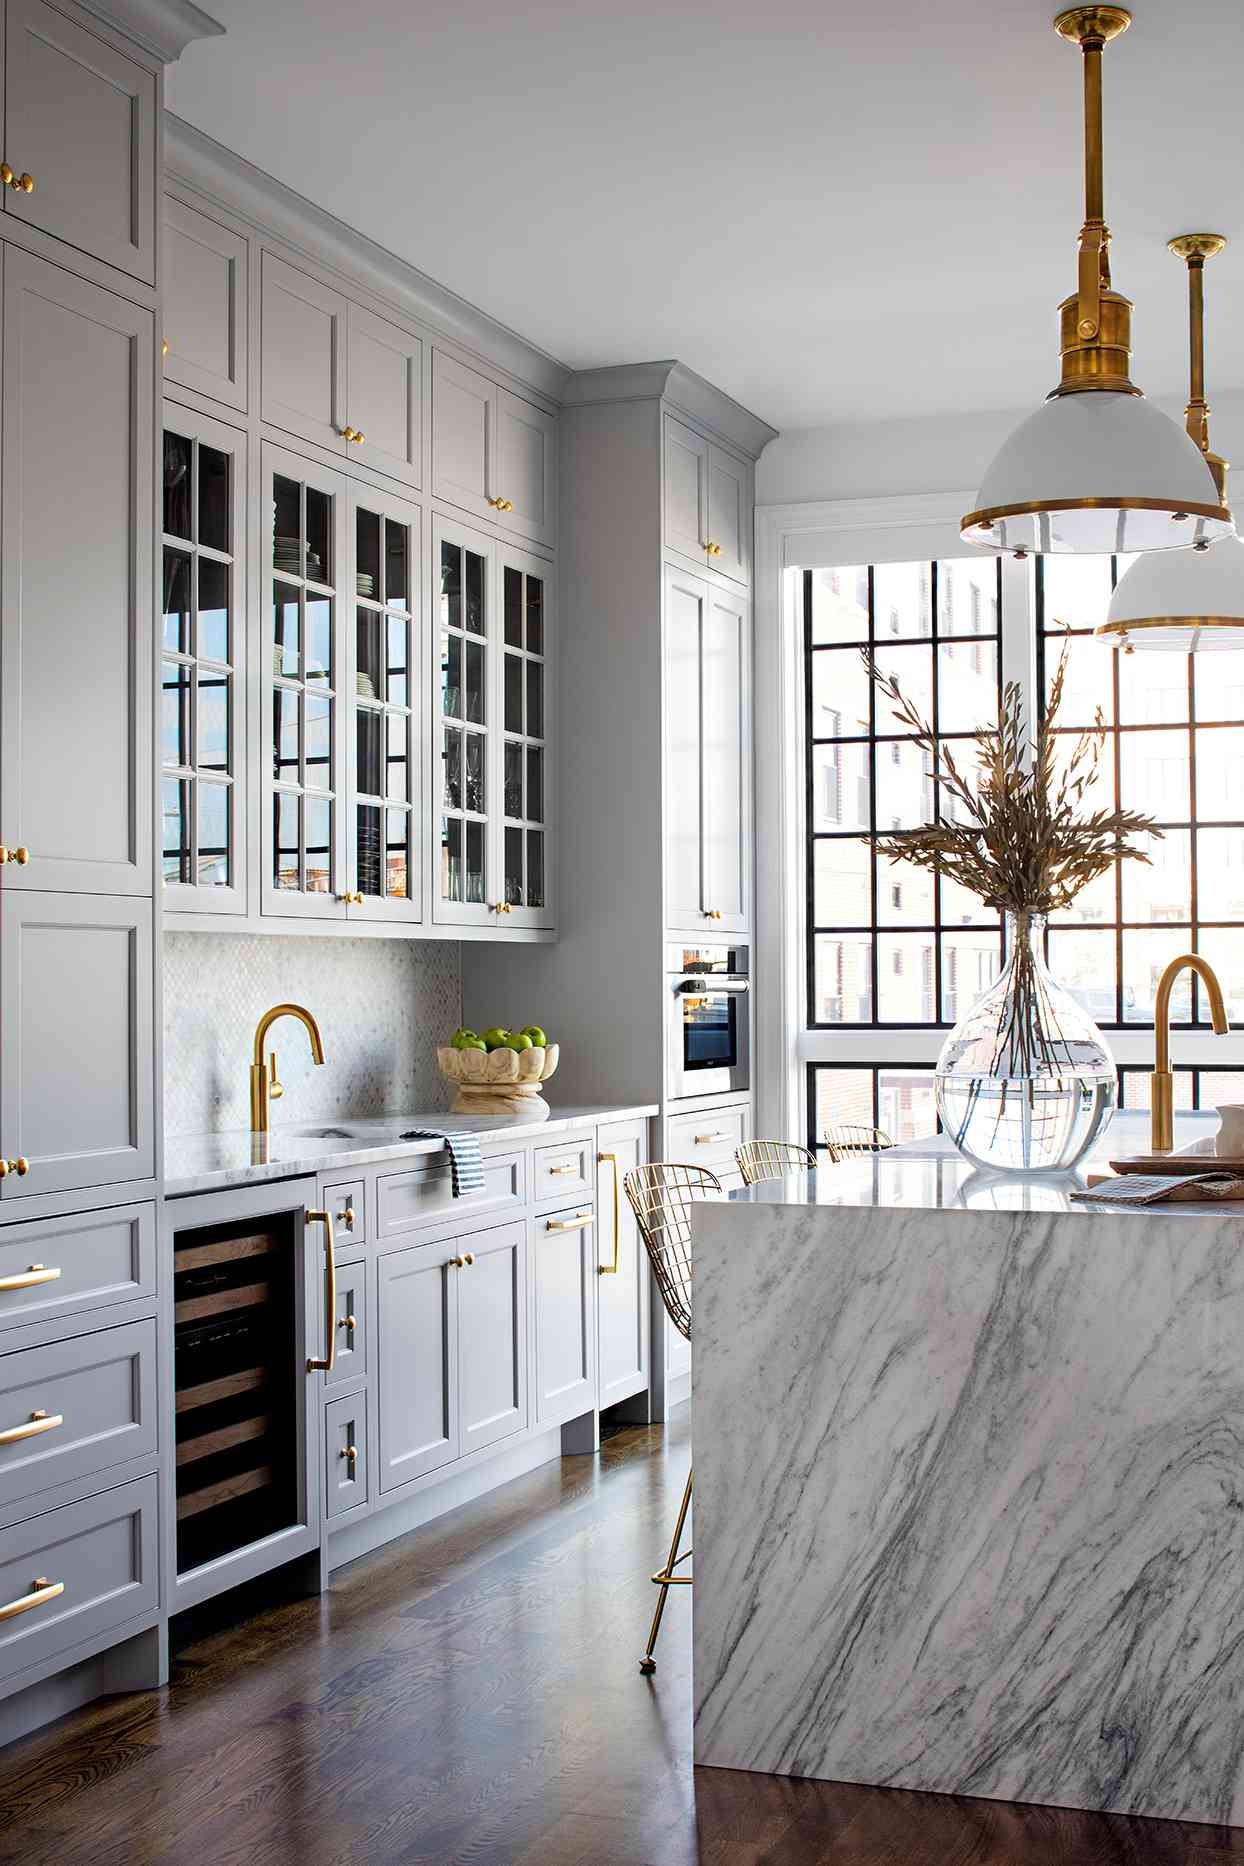 6 Proven Tips for Choosing the Perfect Gray Kitchen Cabinet Colors